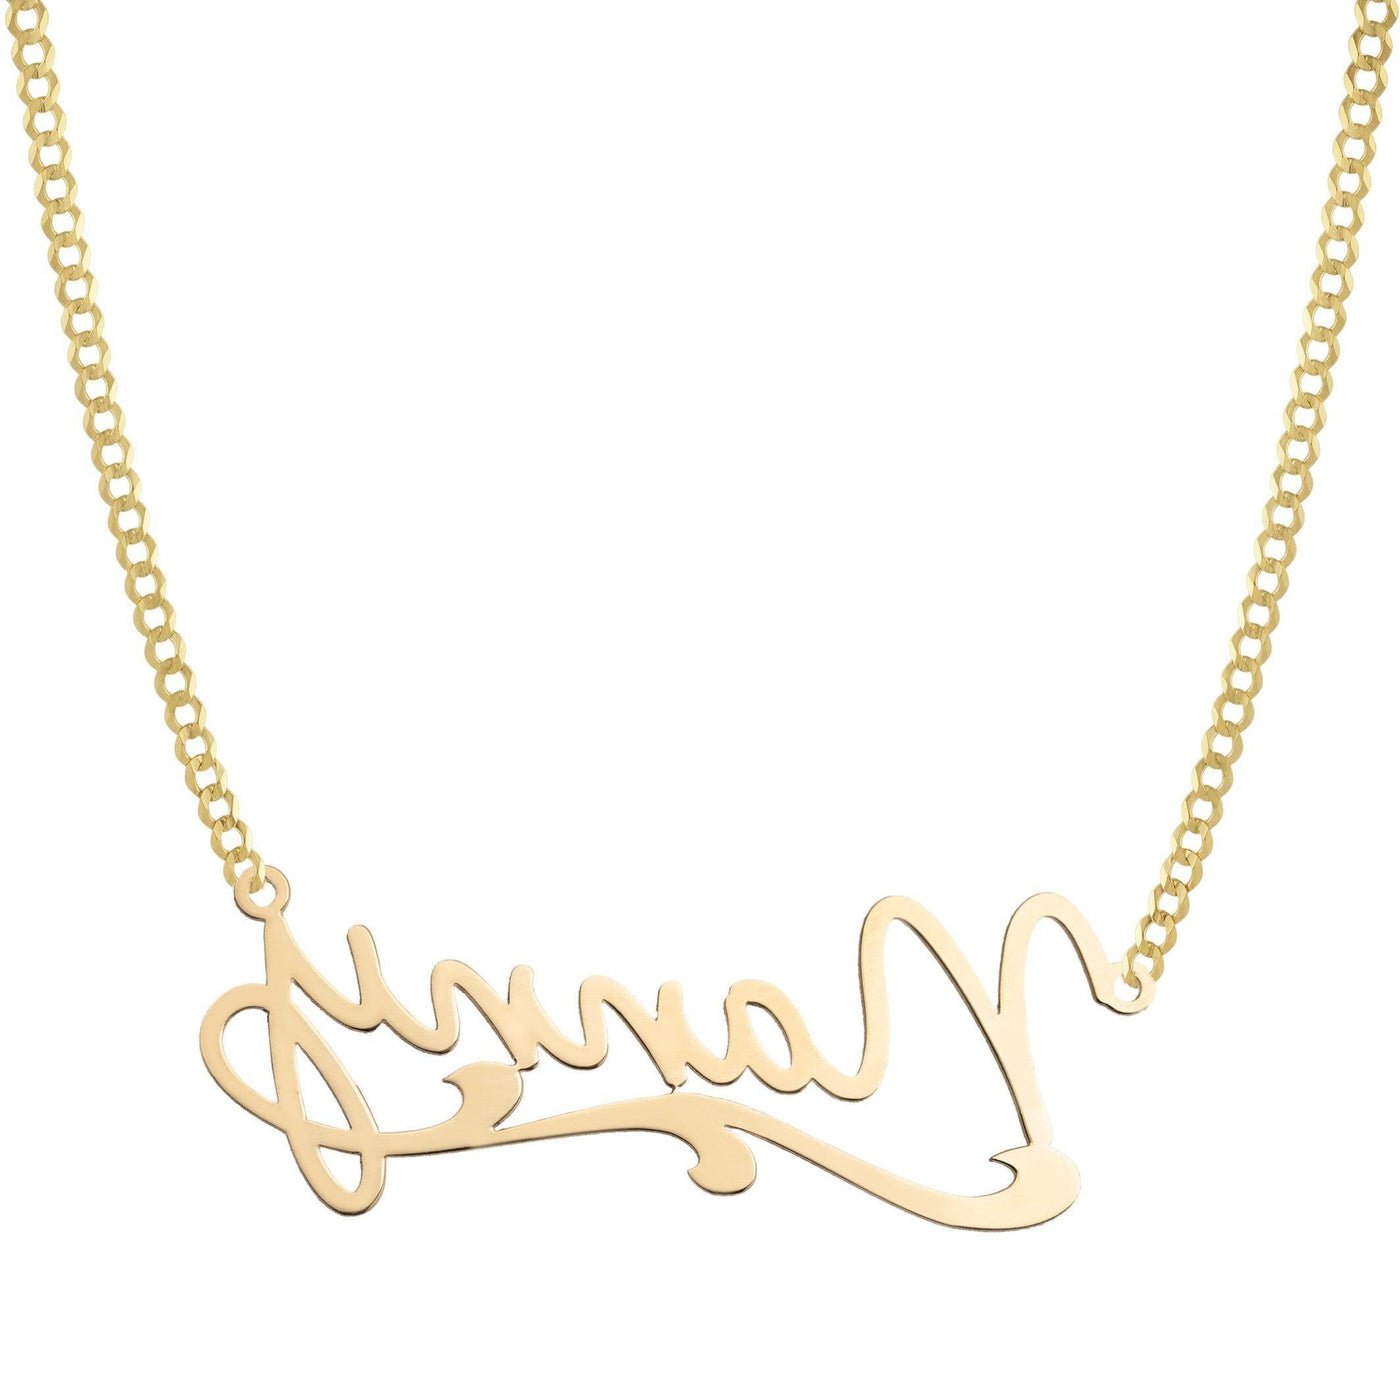 Ladies Script Name Plate Necklace 14K Gold - Style 55 - bayamjewelry